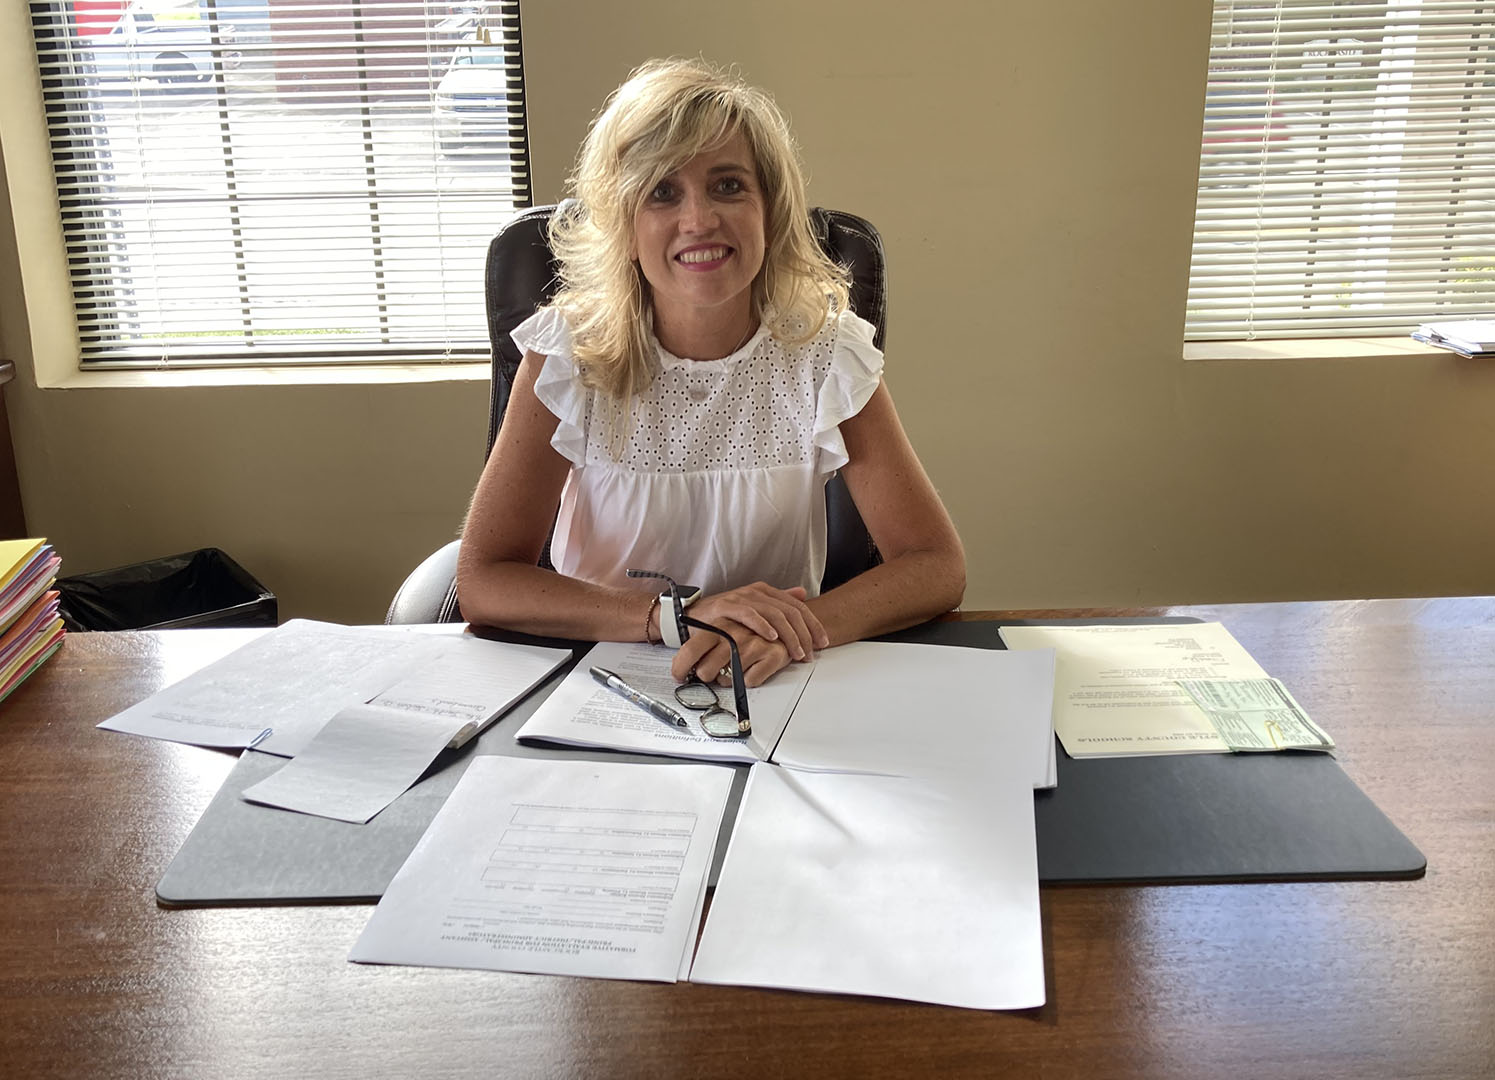 Carrie Ballinger, Rockcastle County's new superintendent, works at her desk in Mt. Vernon.